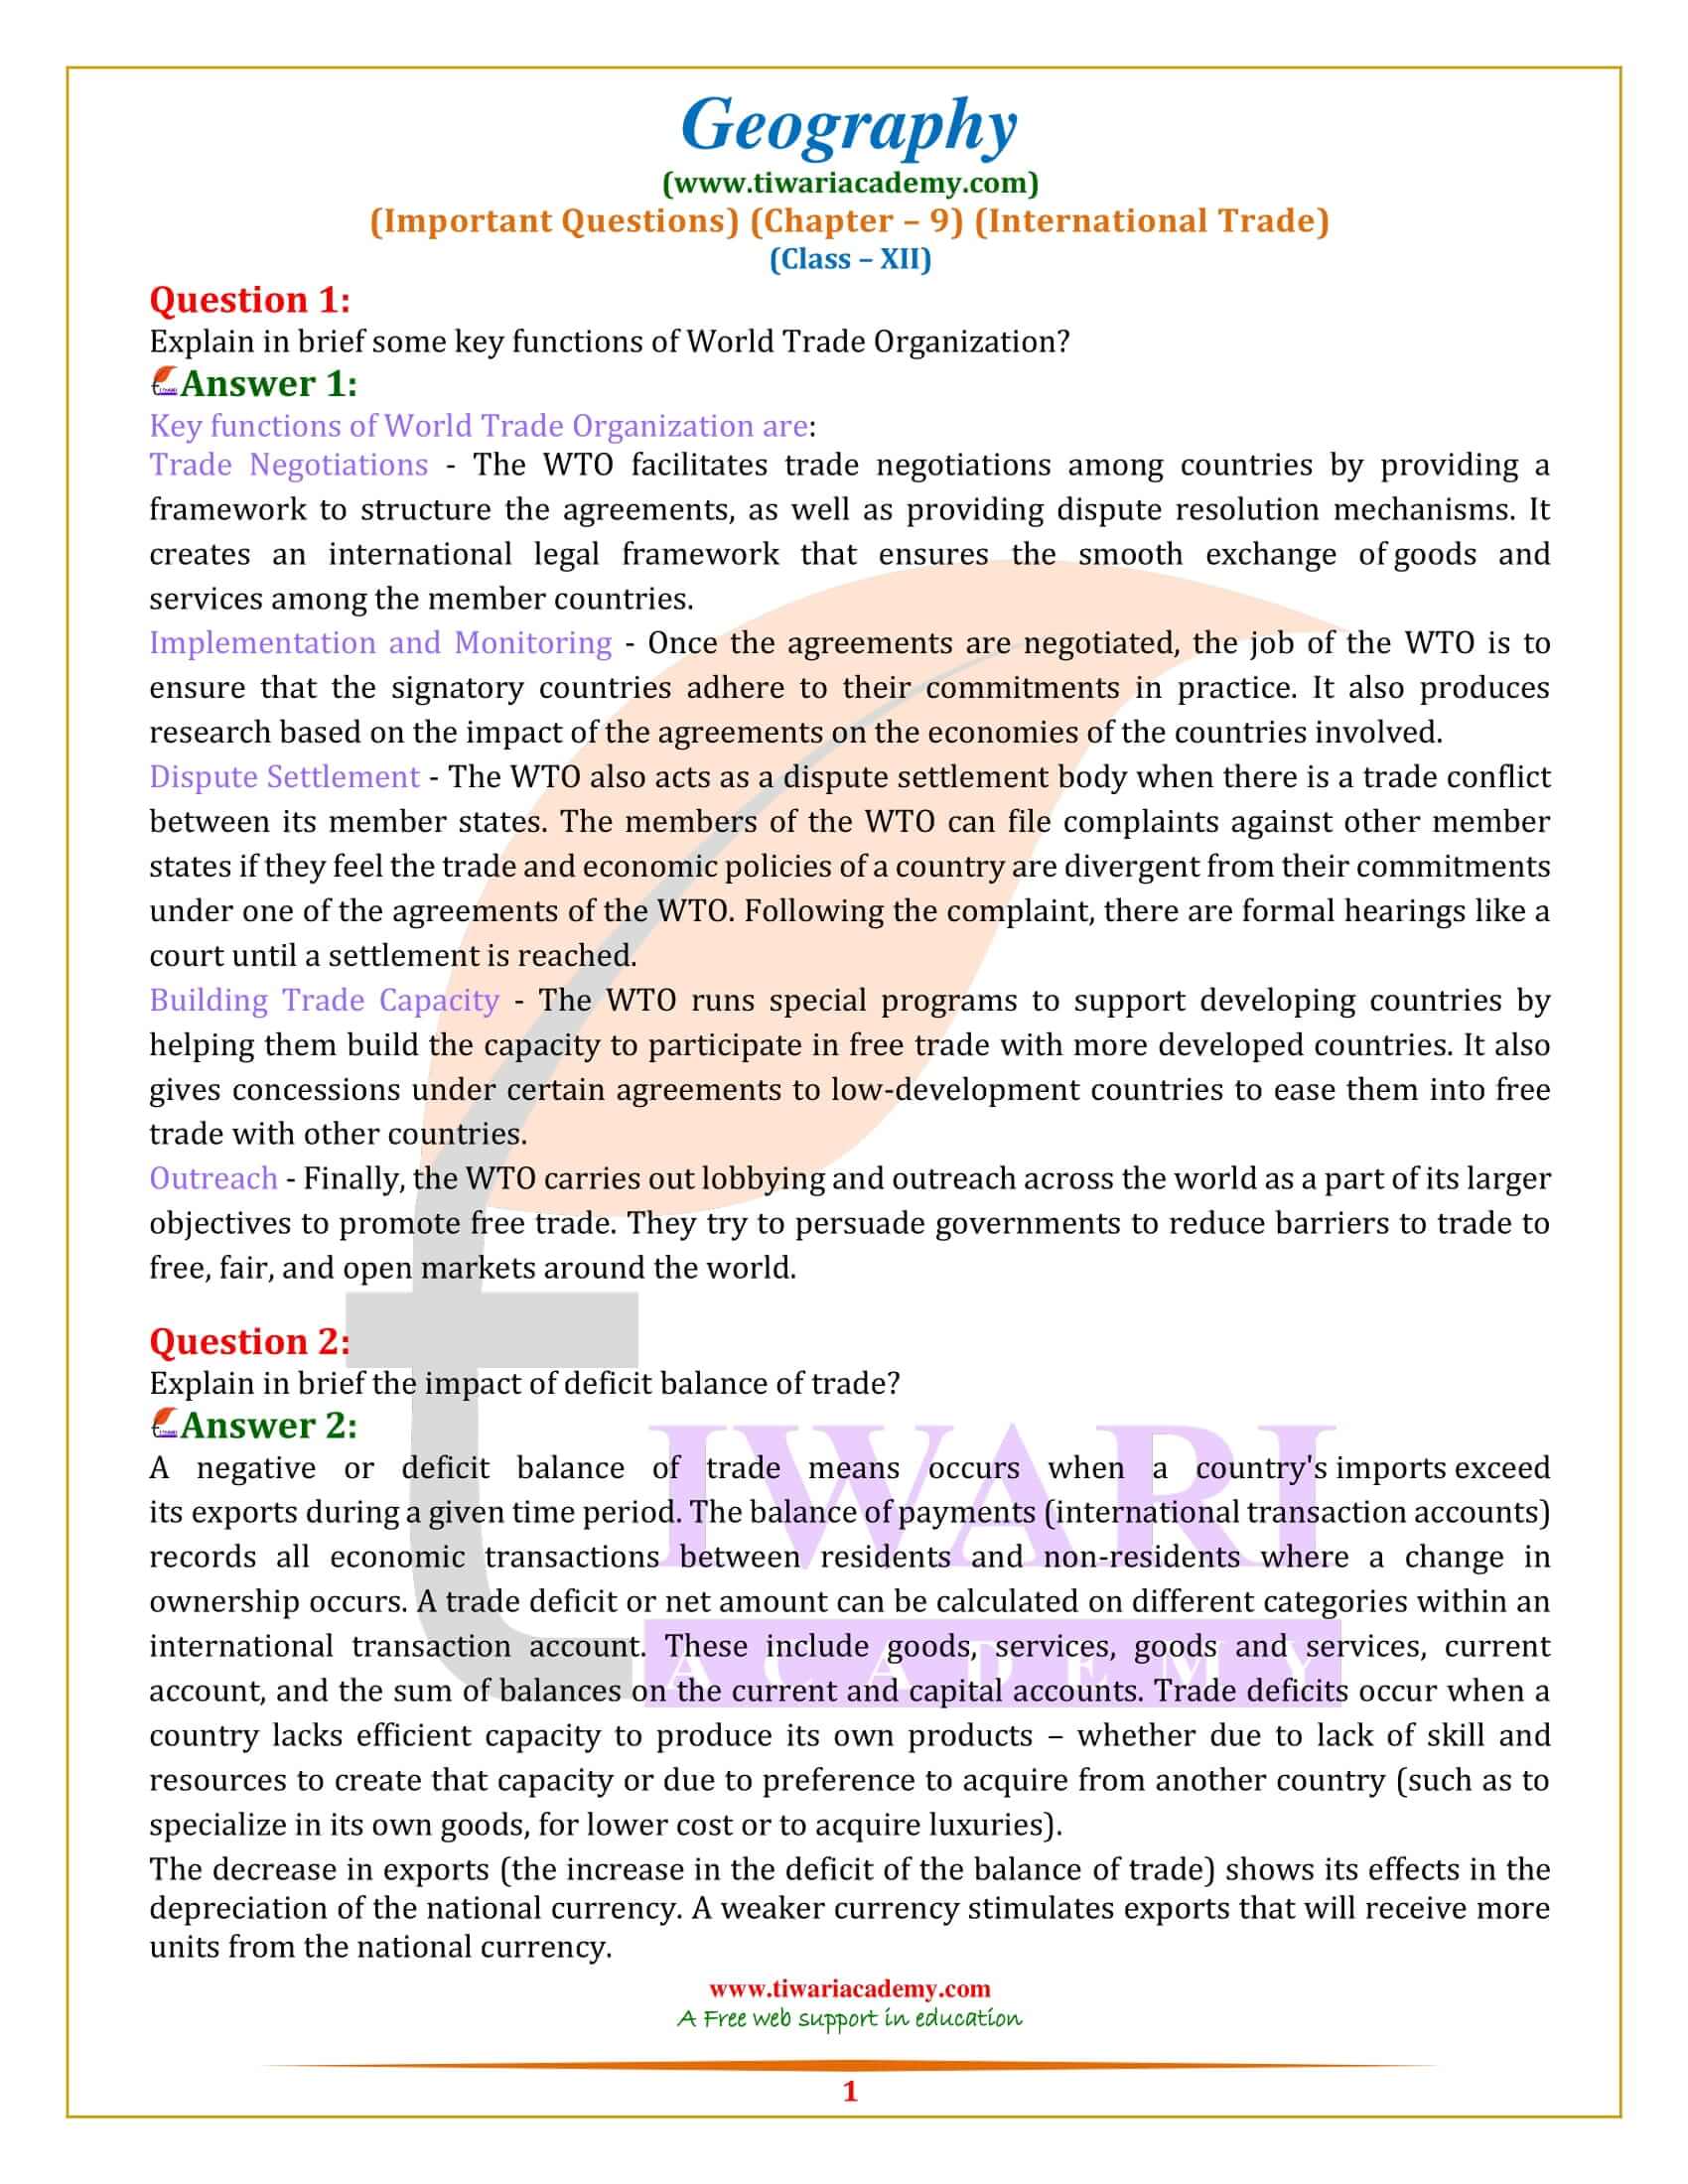 Class 12 Geography Chapter 9 Important Questions Answers